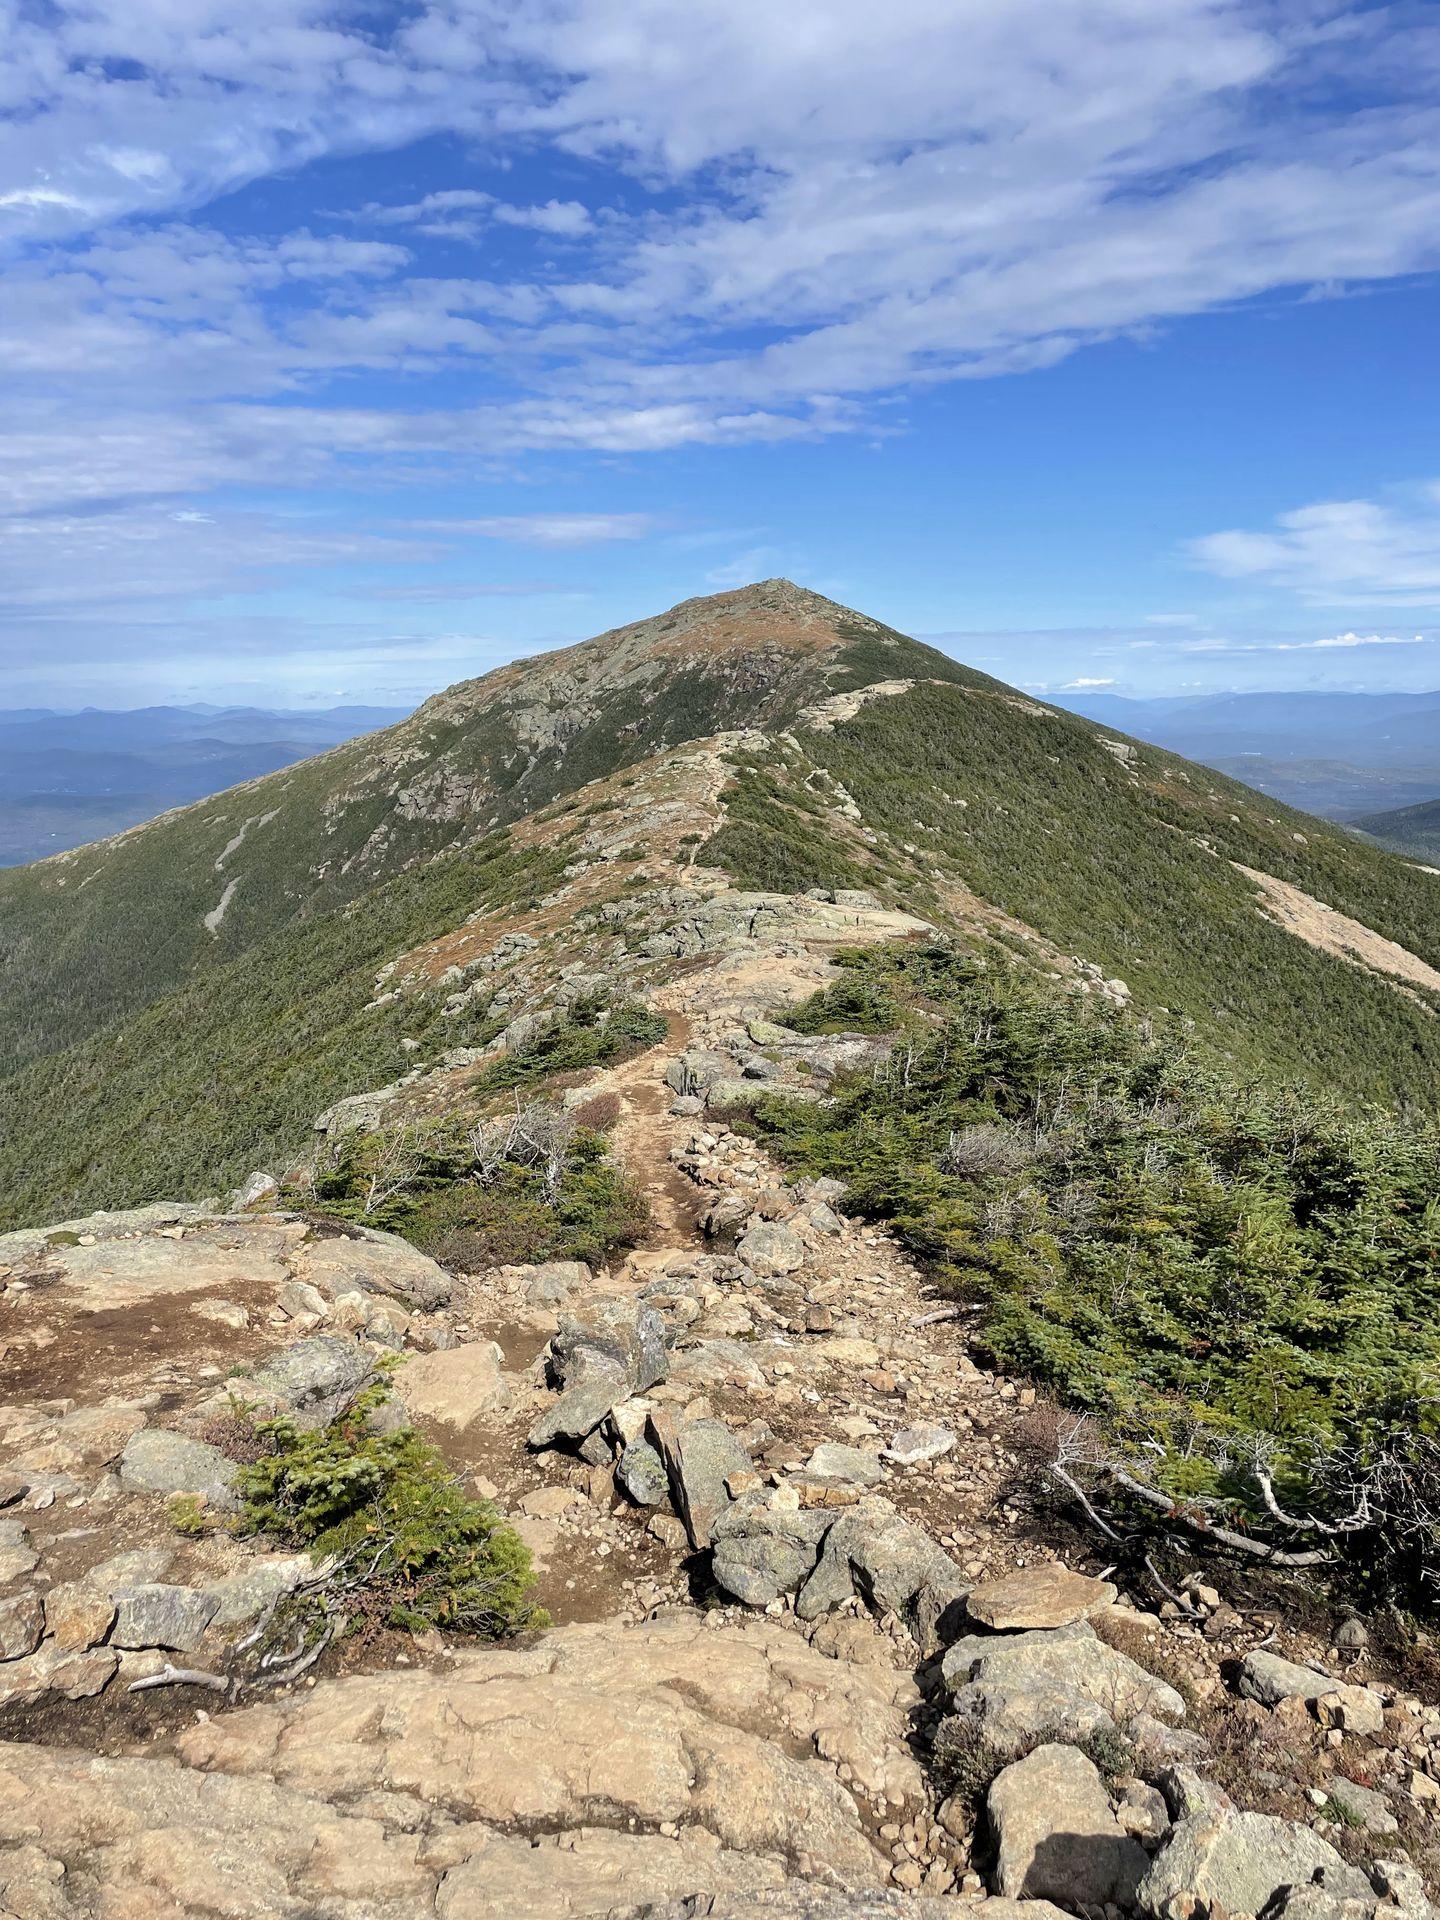 Looking at the ridge trail that leads to the top of Mount Lafayette